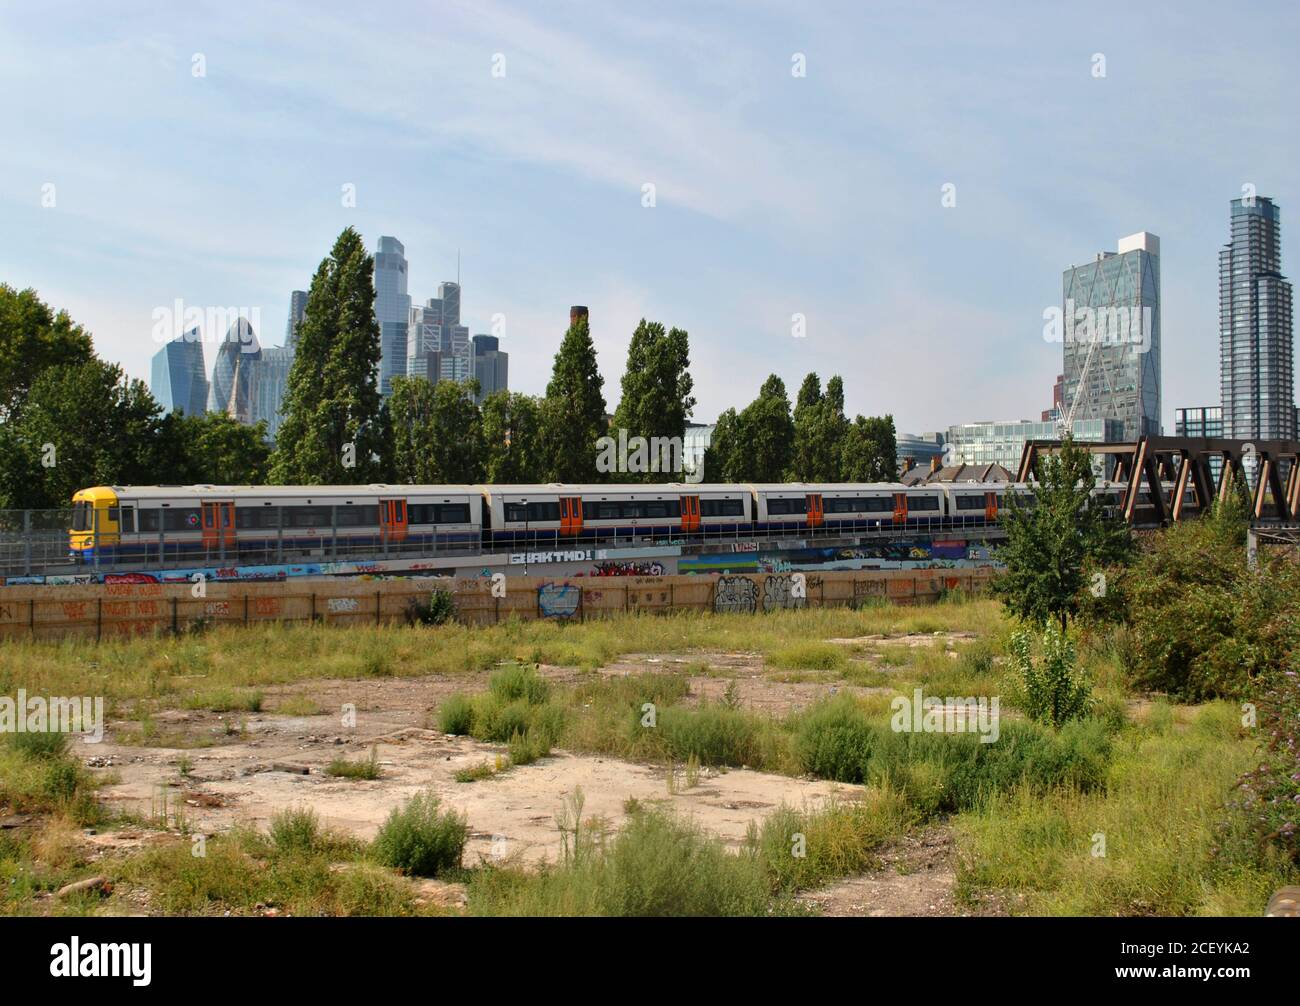 Image of the once exciting & varied, Nomadic Community Gardens in Shoreditch which are now empty having been cleared in readiness for construction. Stock Photo